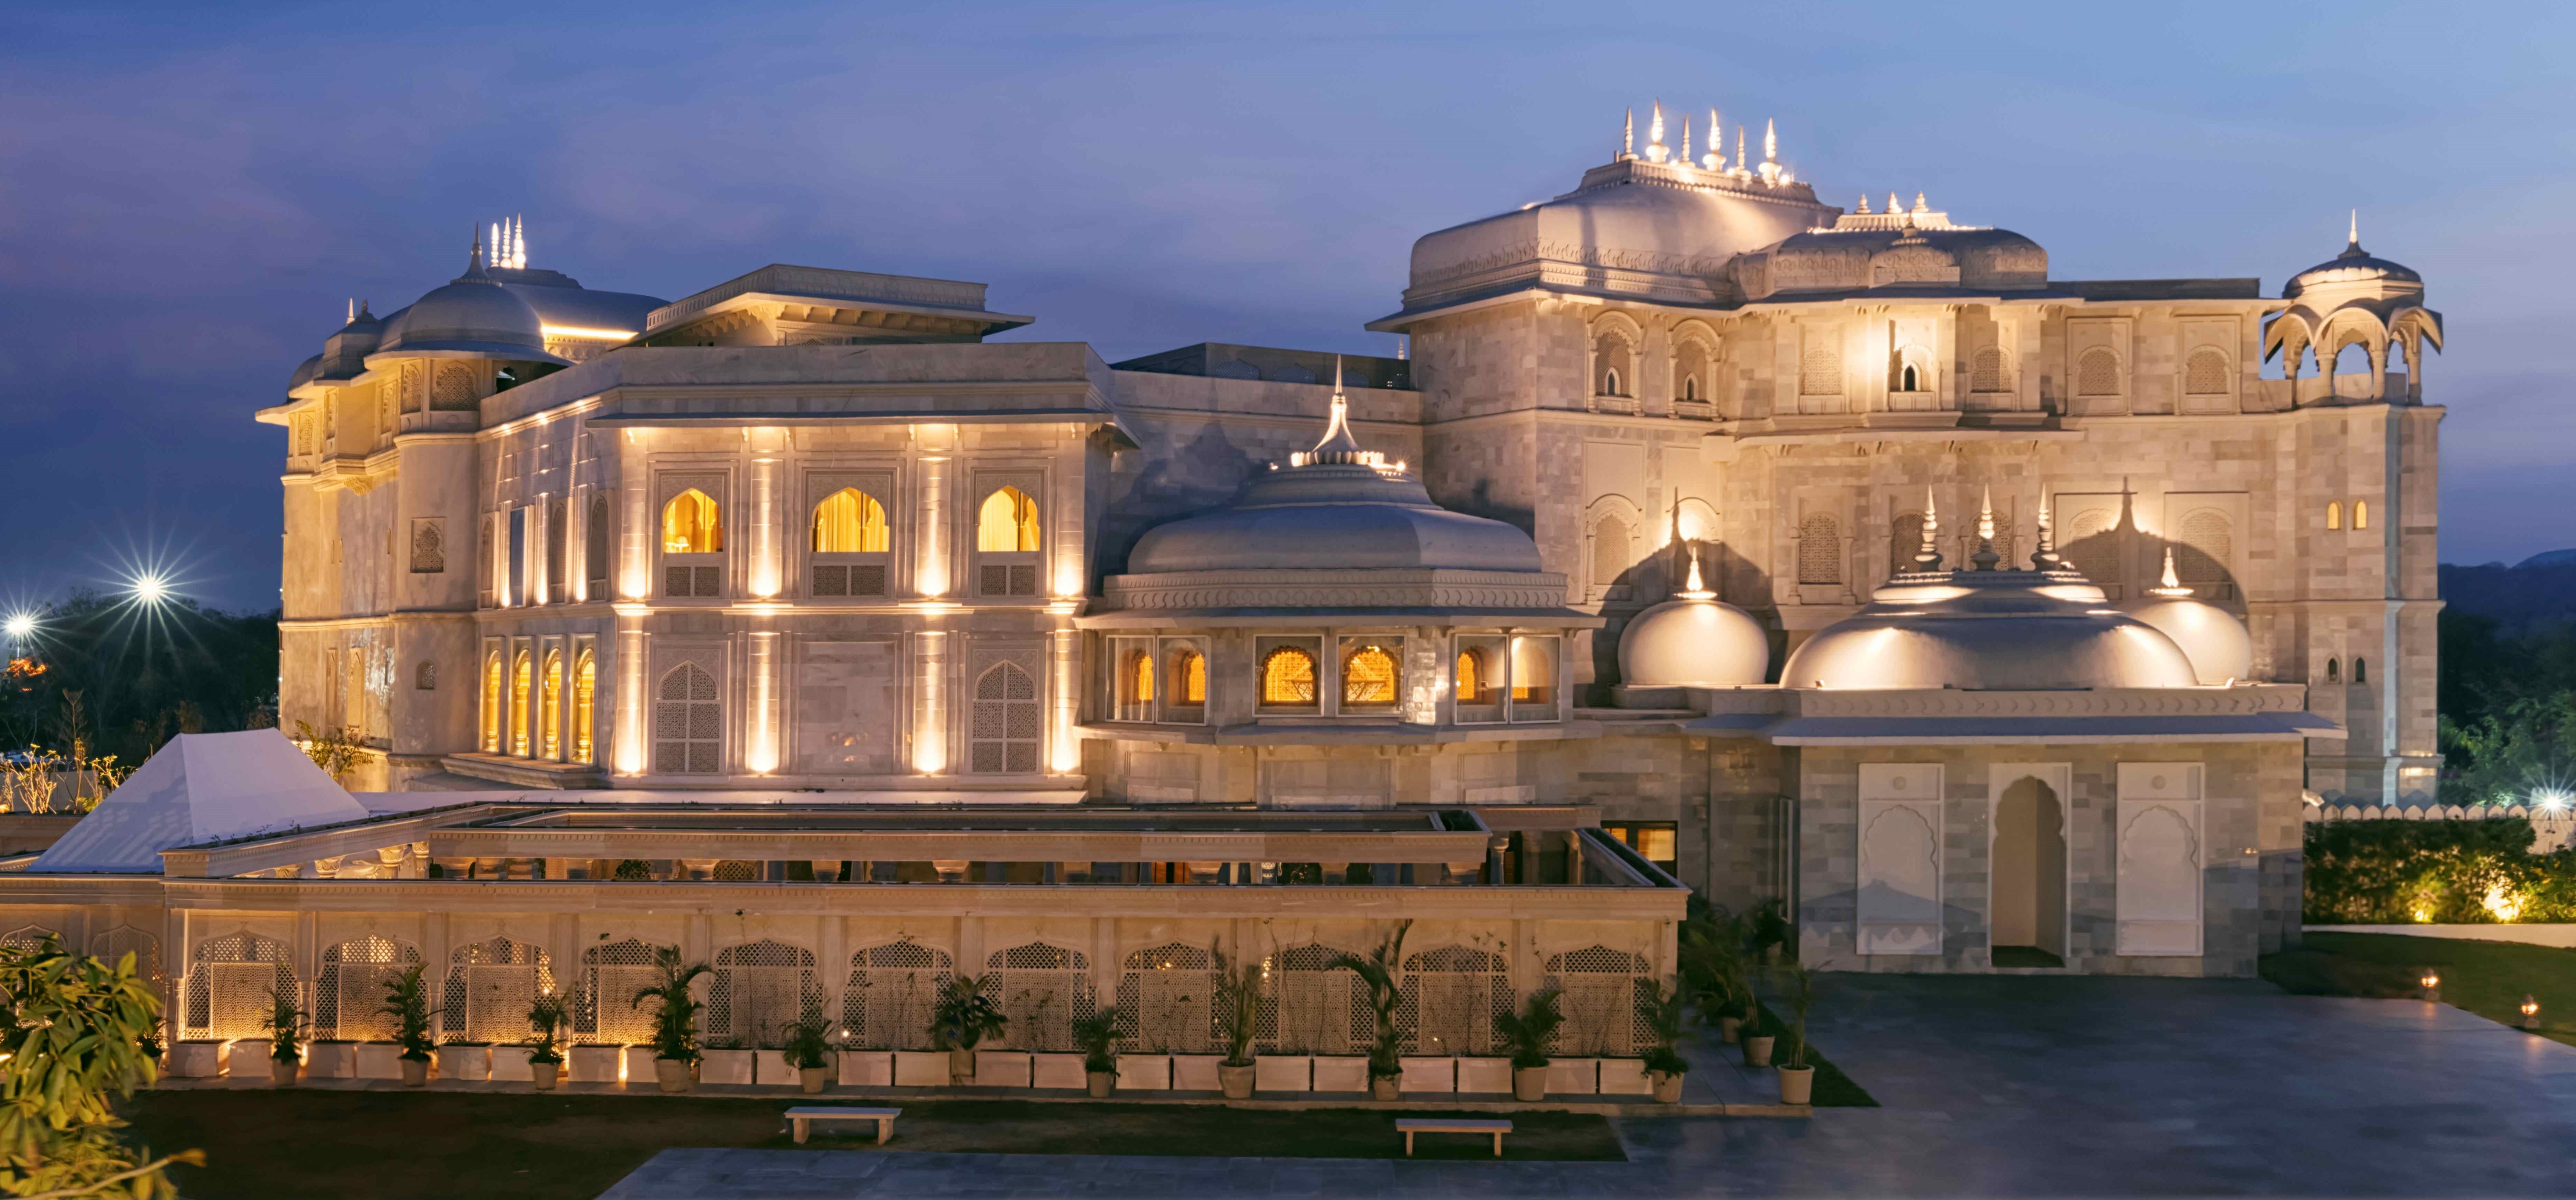 Raffles Hotels & Resorts has been launched in Jaipur, bringing bespoke service and enchanting glamour to India’s ''''Pink City''''.